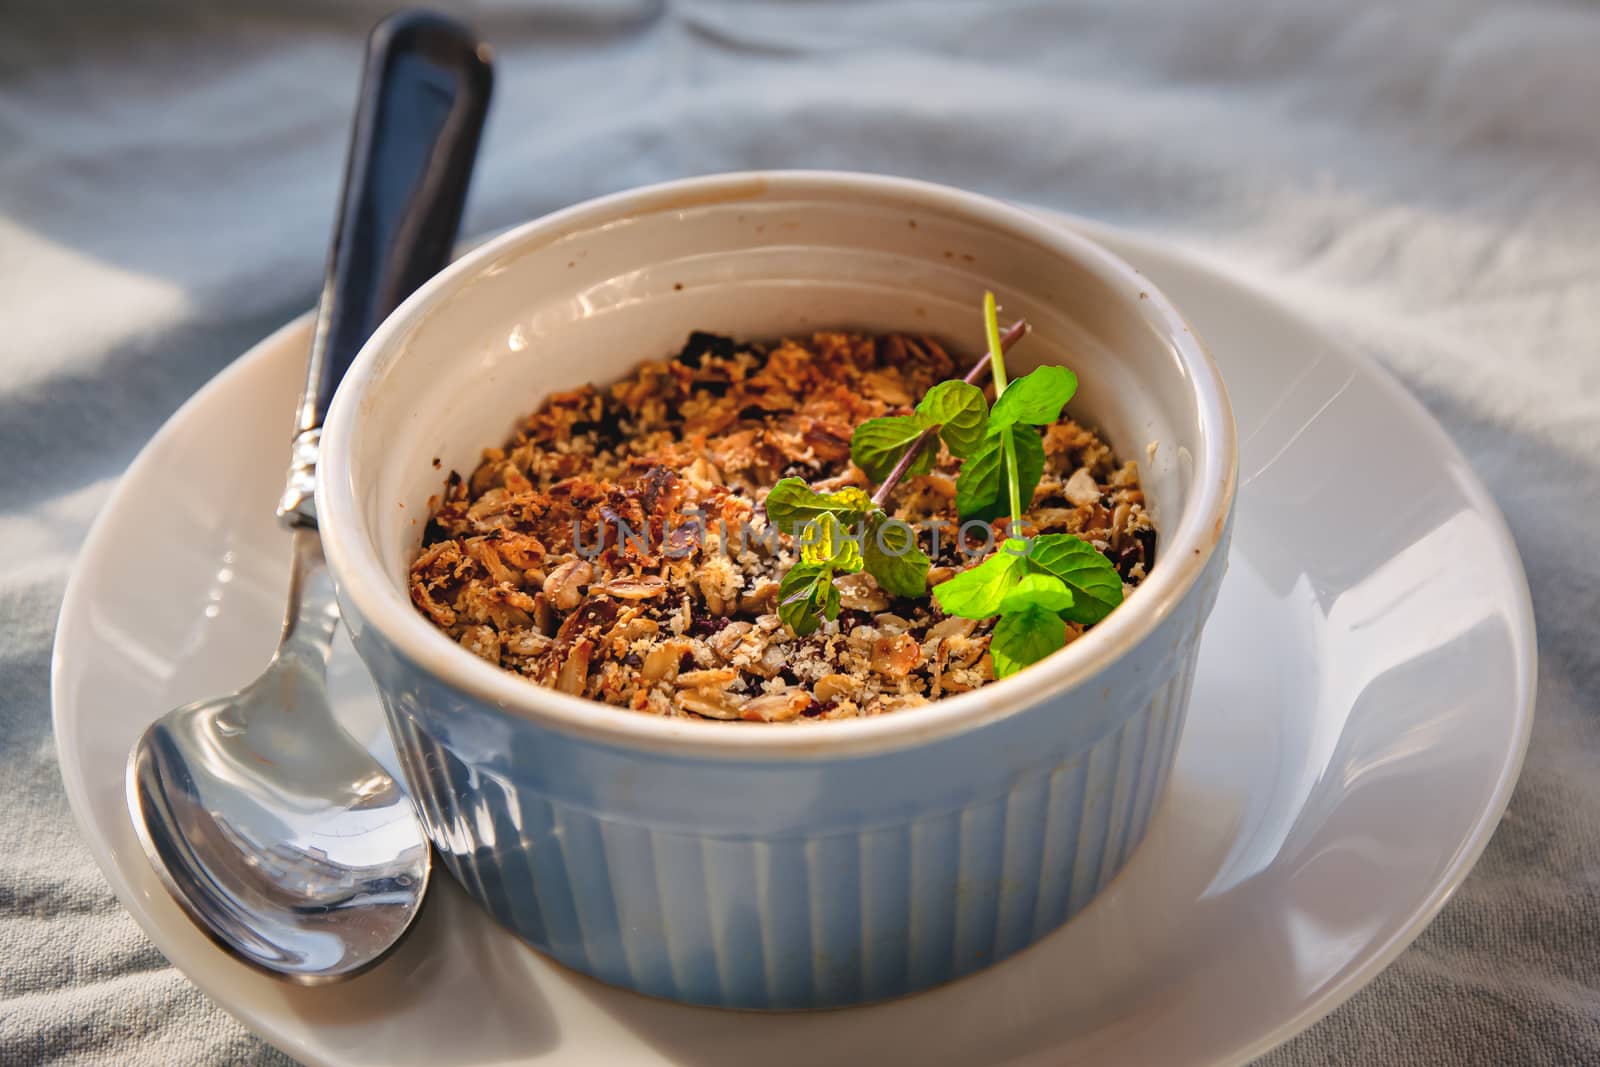 baked oat-blueberry crumble with mint in a white and blue plate on a rustic linen tablecloth. Save the space, top view. The concept of healthy proper nutrition for breakfast, vegetarianism